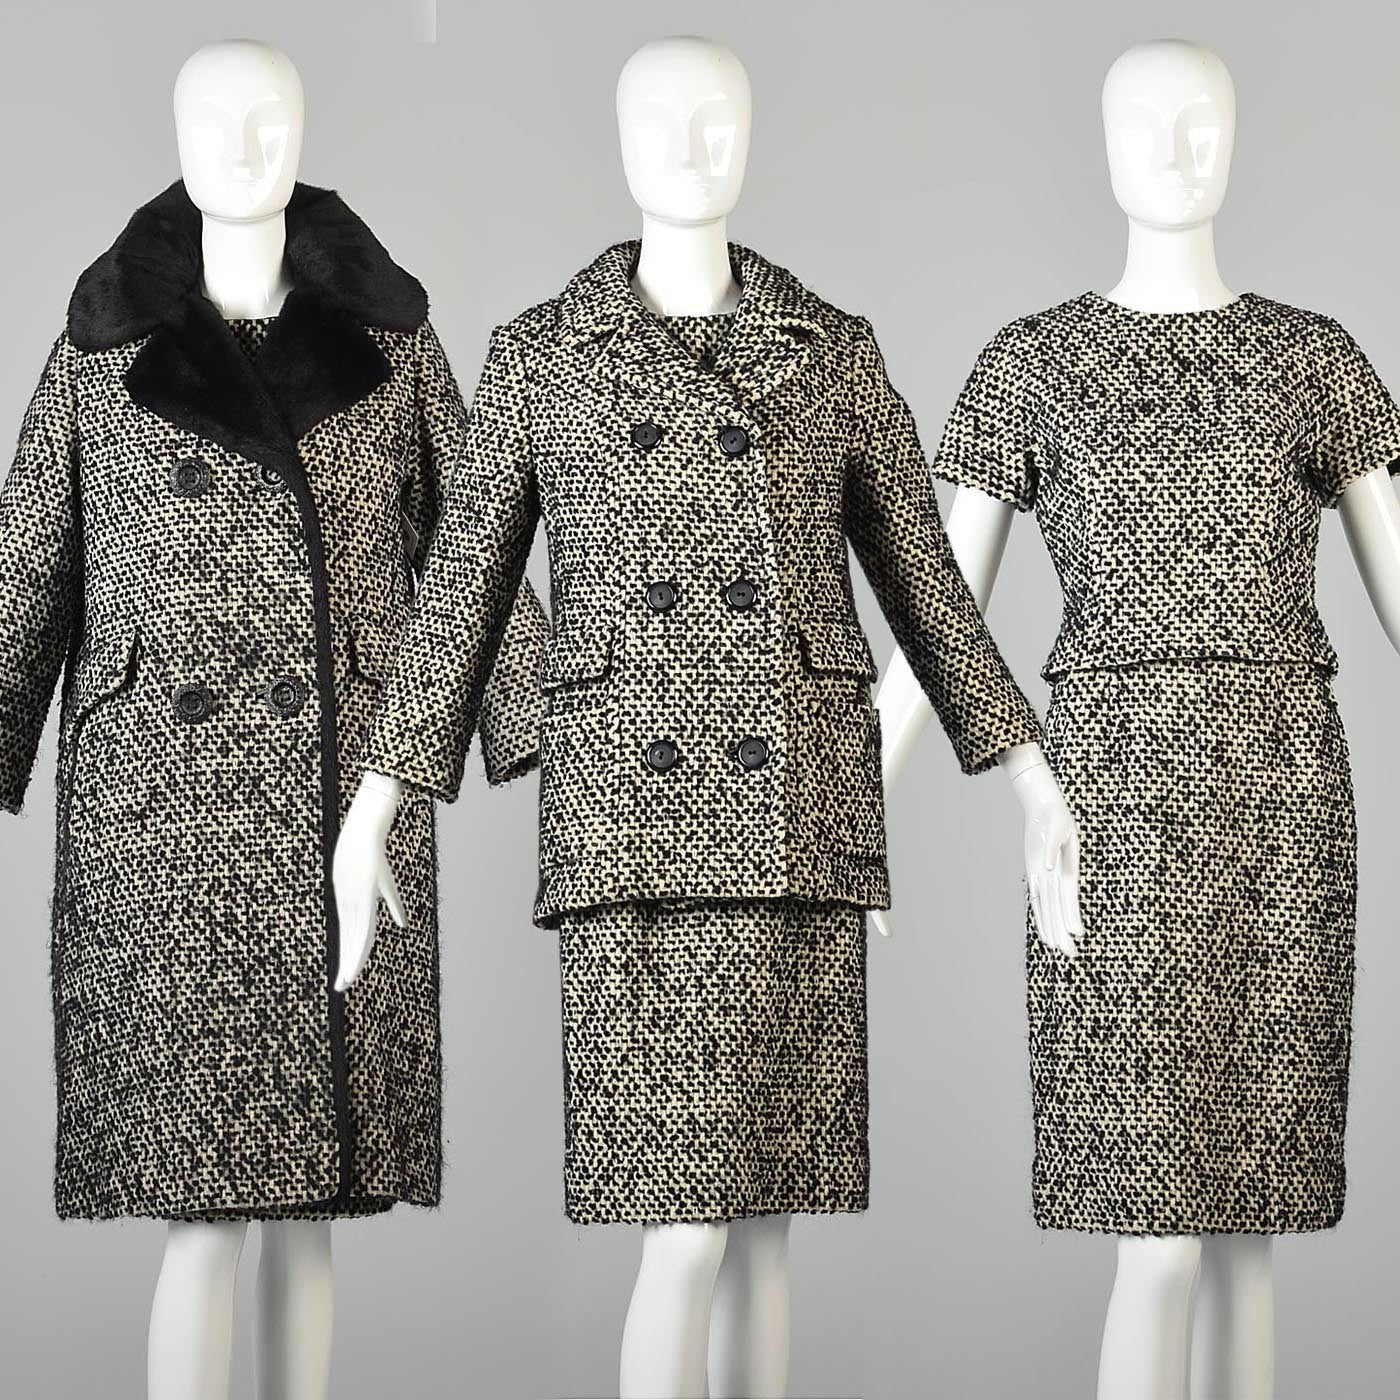 1960s Four Piece Tweed Set with Top, Skirt, Jacket, and Coat